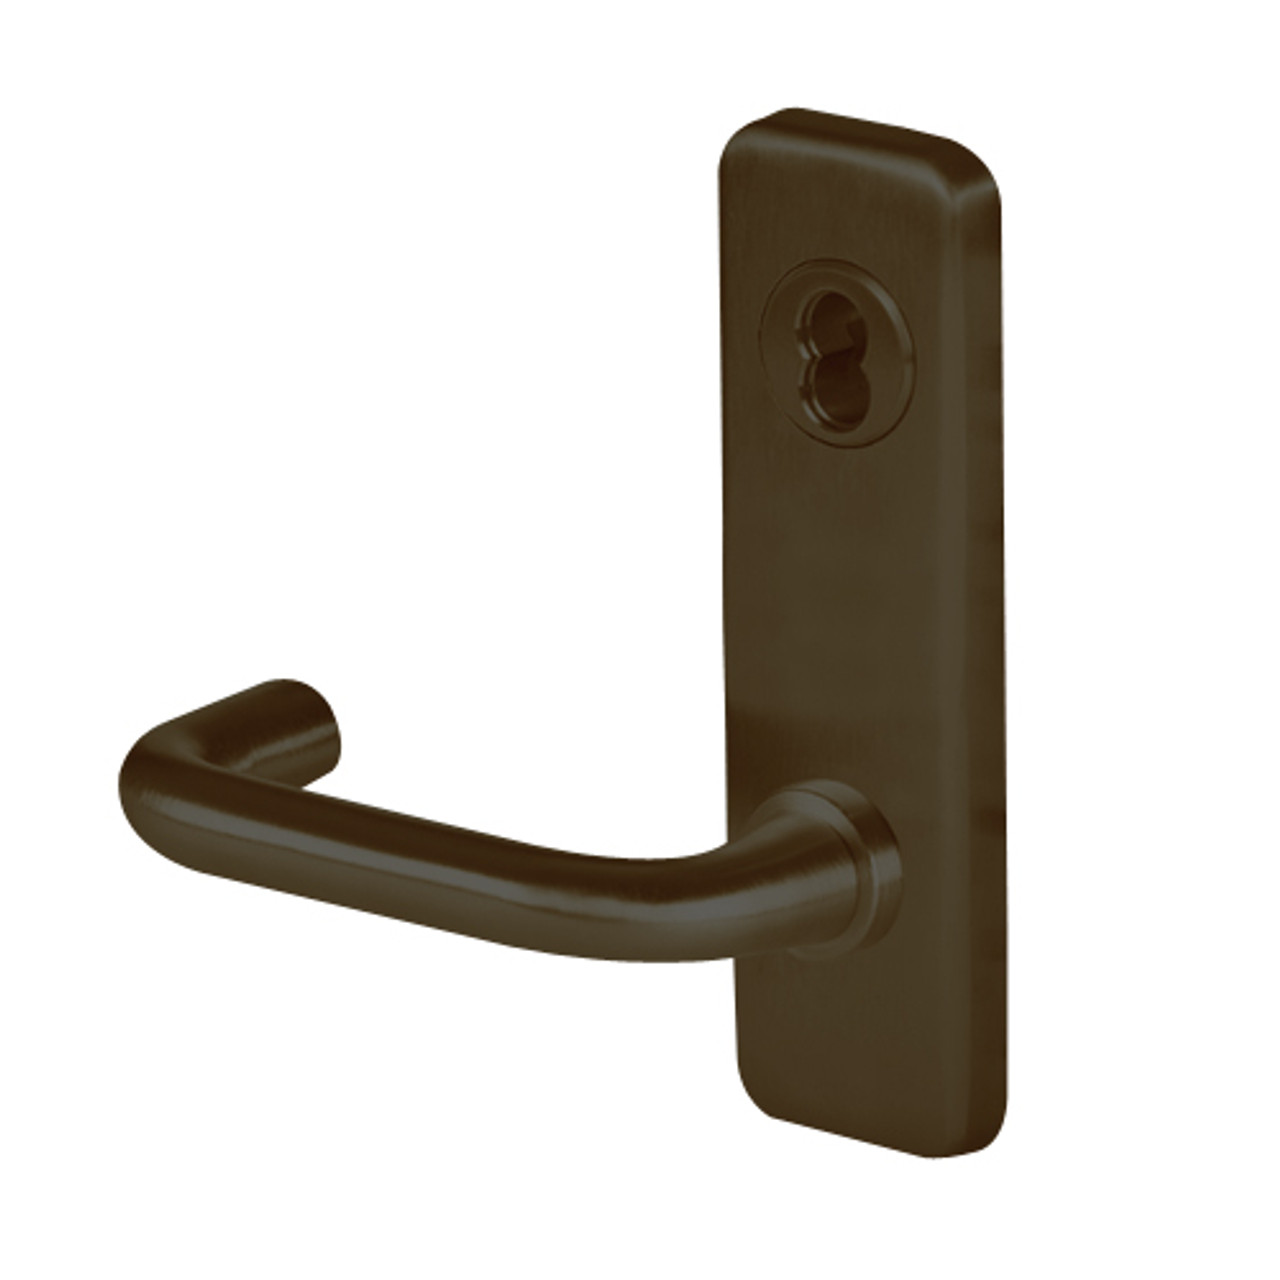 45H0NX3J613 Best 40H Series Exit Function Heavy Duty Mortise Lever Lock with Solid Tube Return Style in Oil Rubbed Bronze